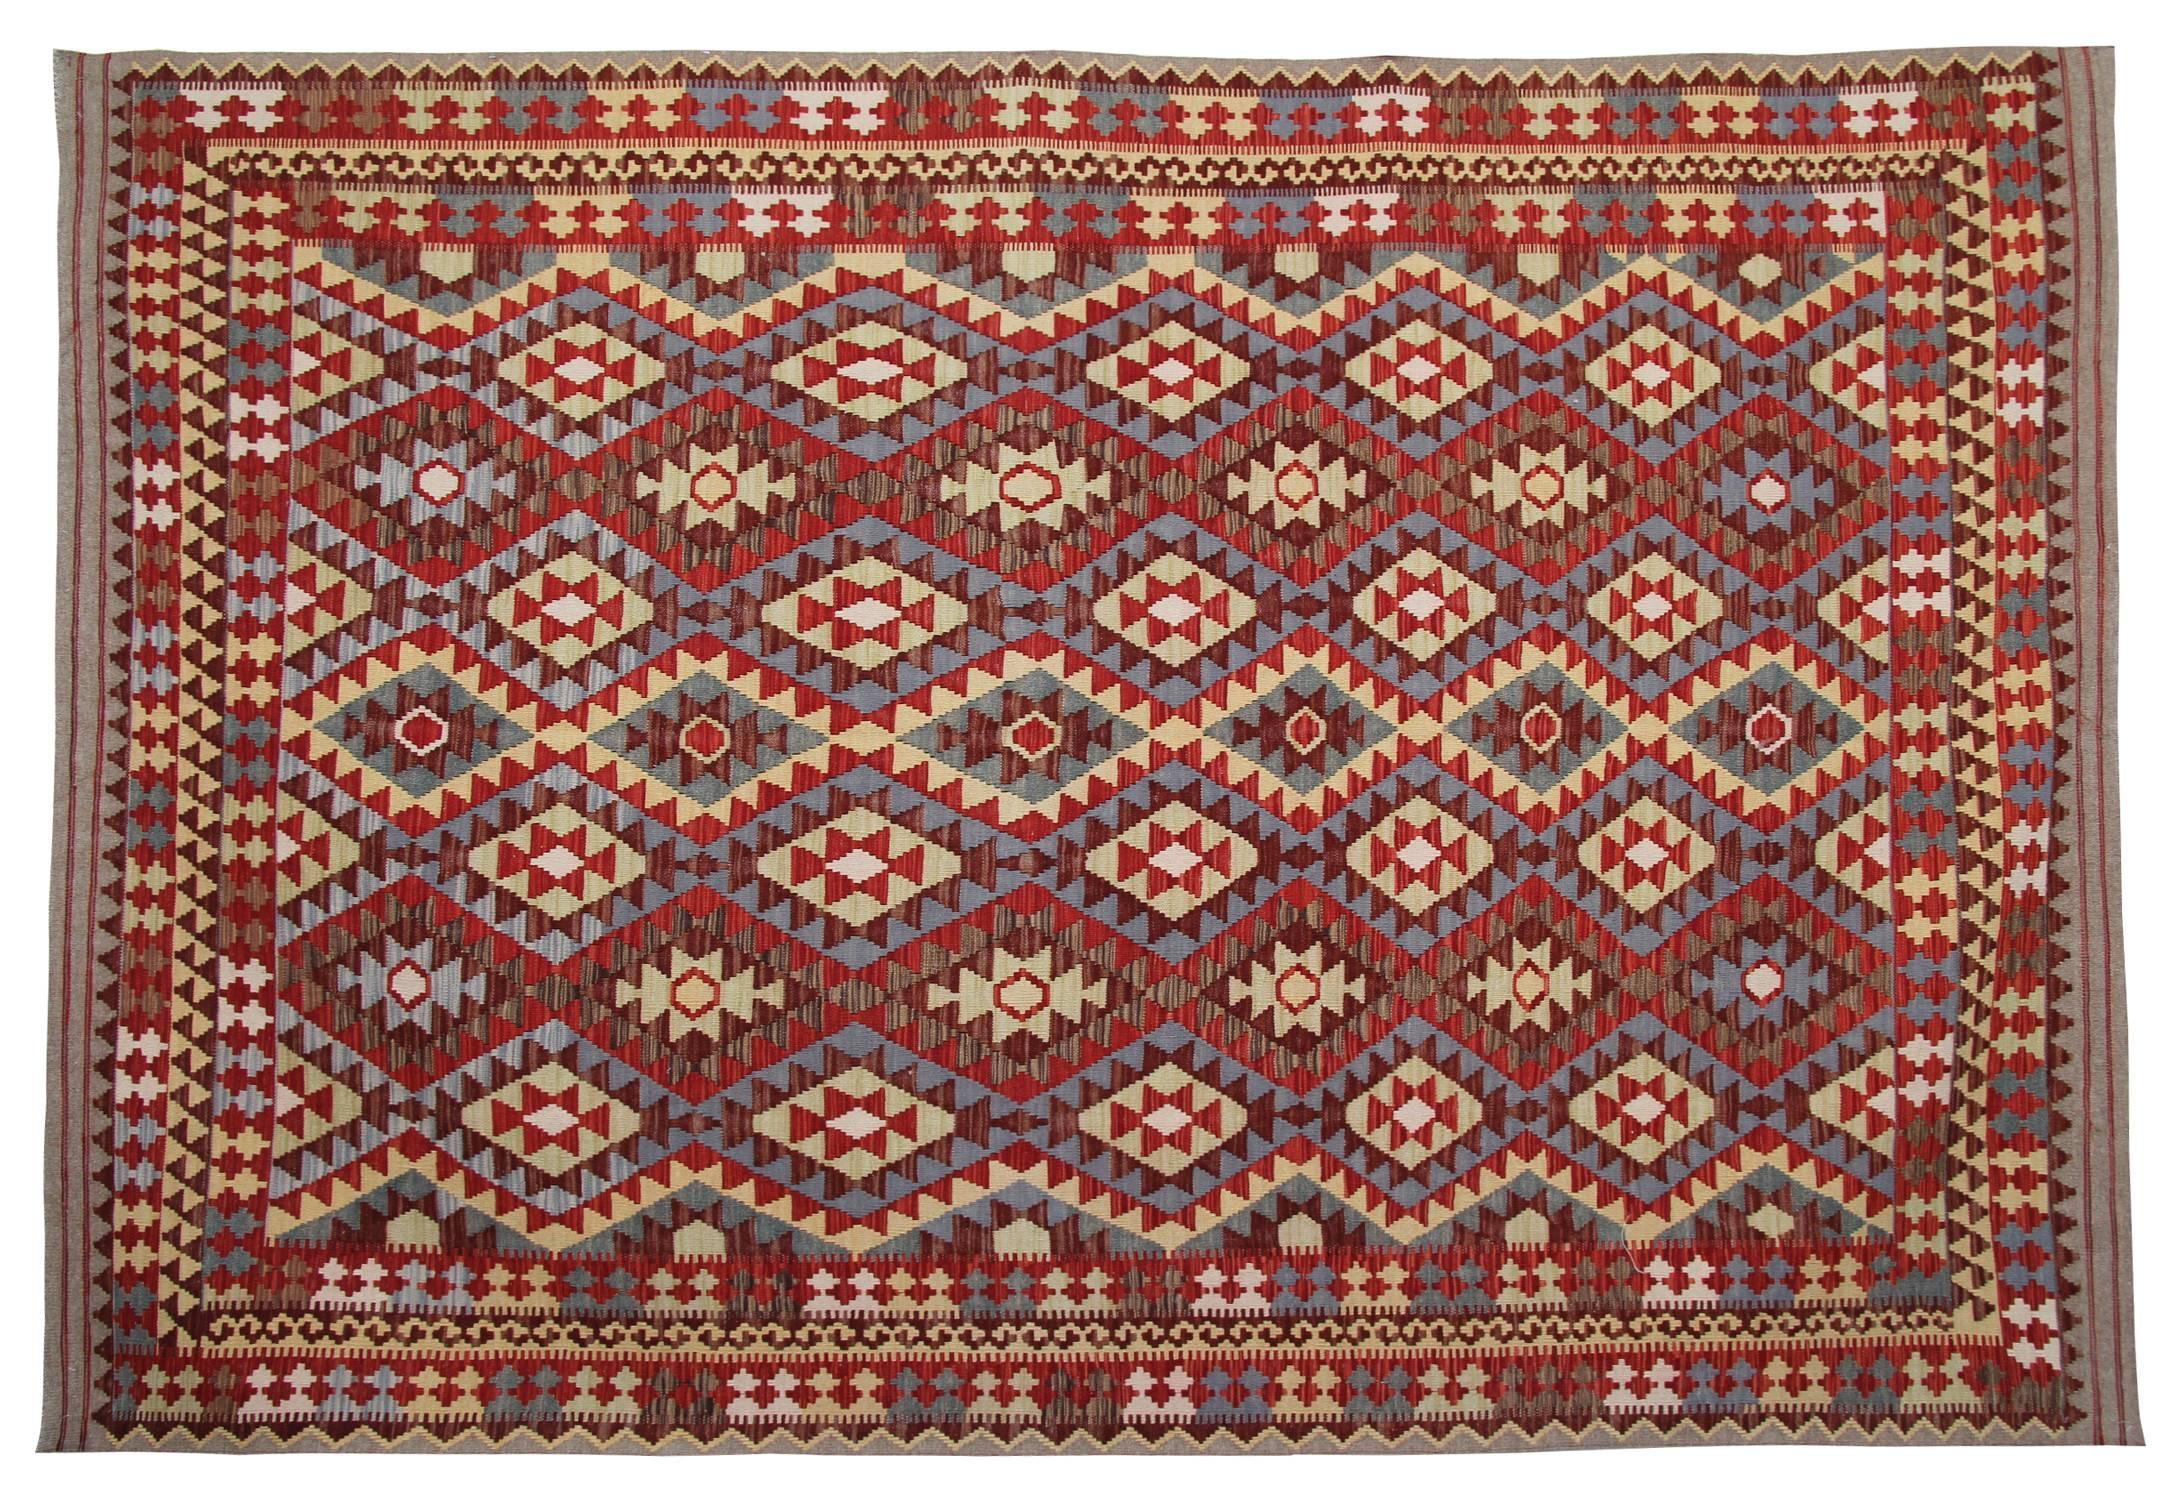 These intriguing traditional rugs are ideal for any environment as living room rugs, thanks to its hardwearing features. In fact, its quality is unique: handwoven natural rugs dyed with organic dyes. The carpet rug was made in Afghanistan, a country